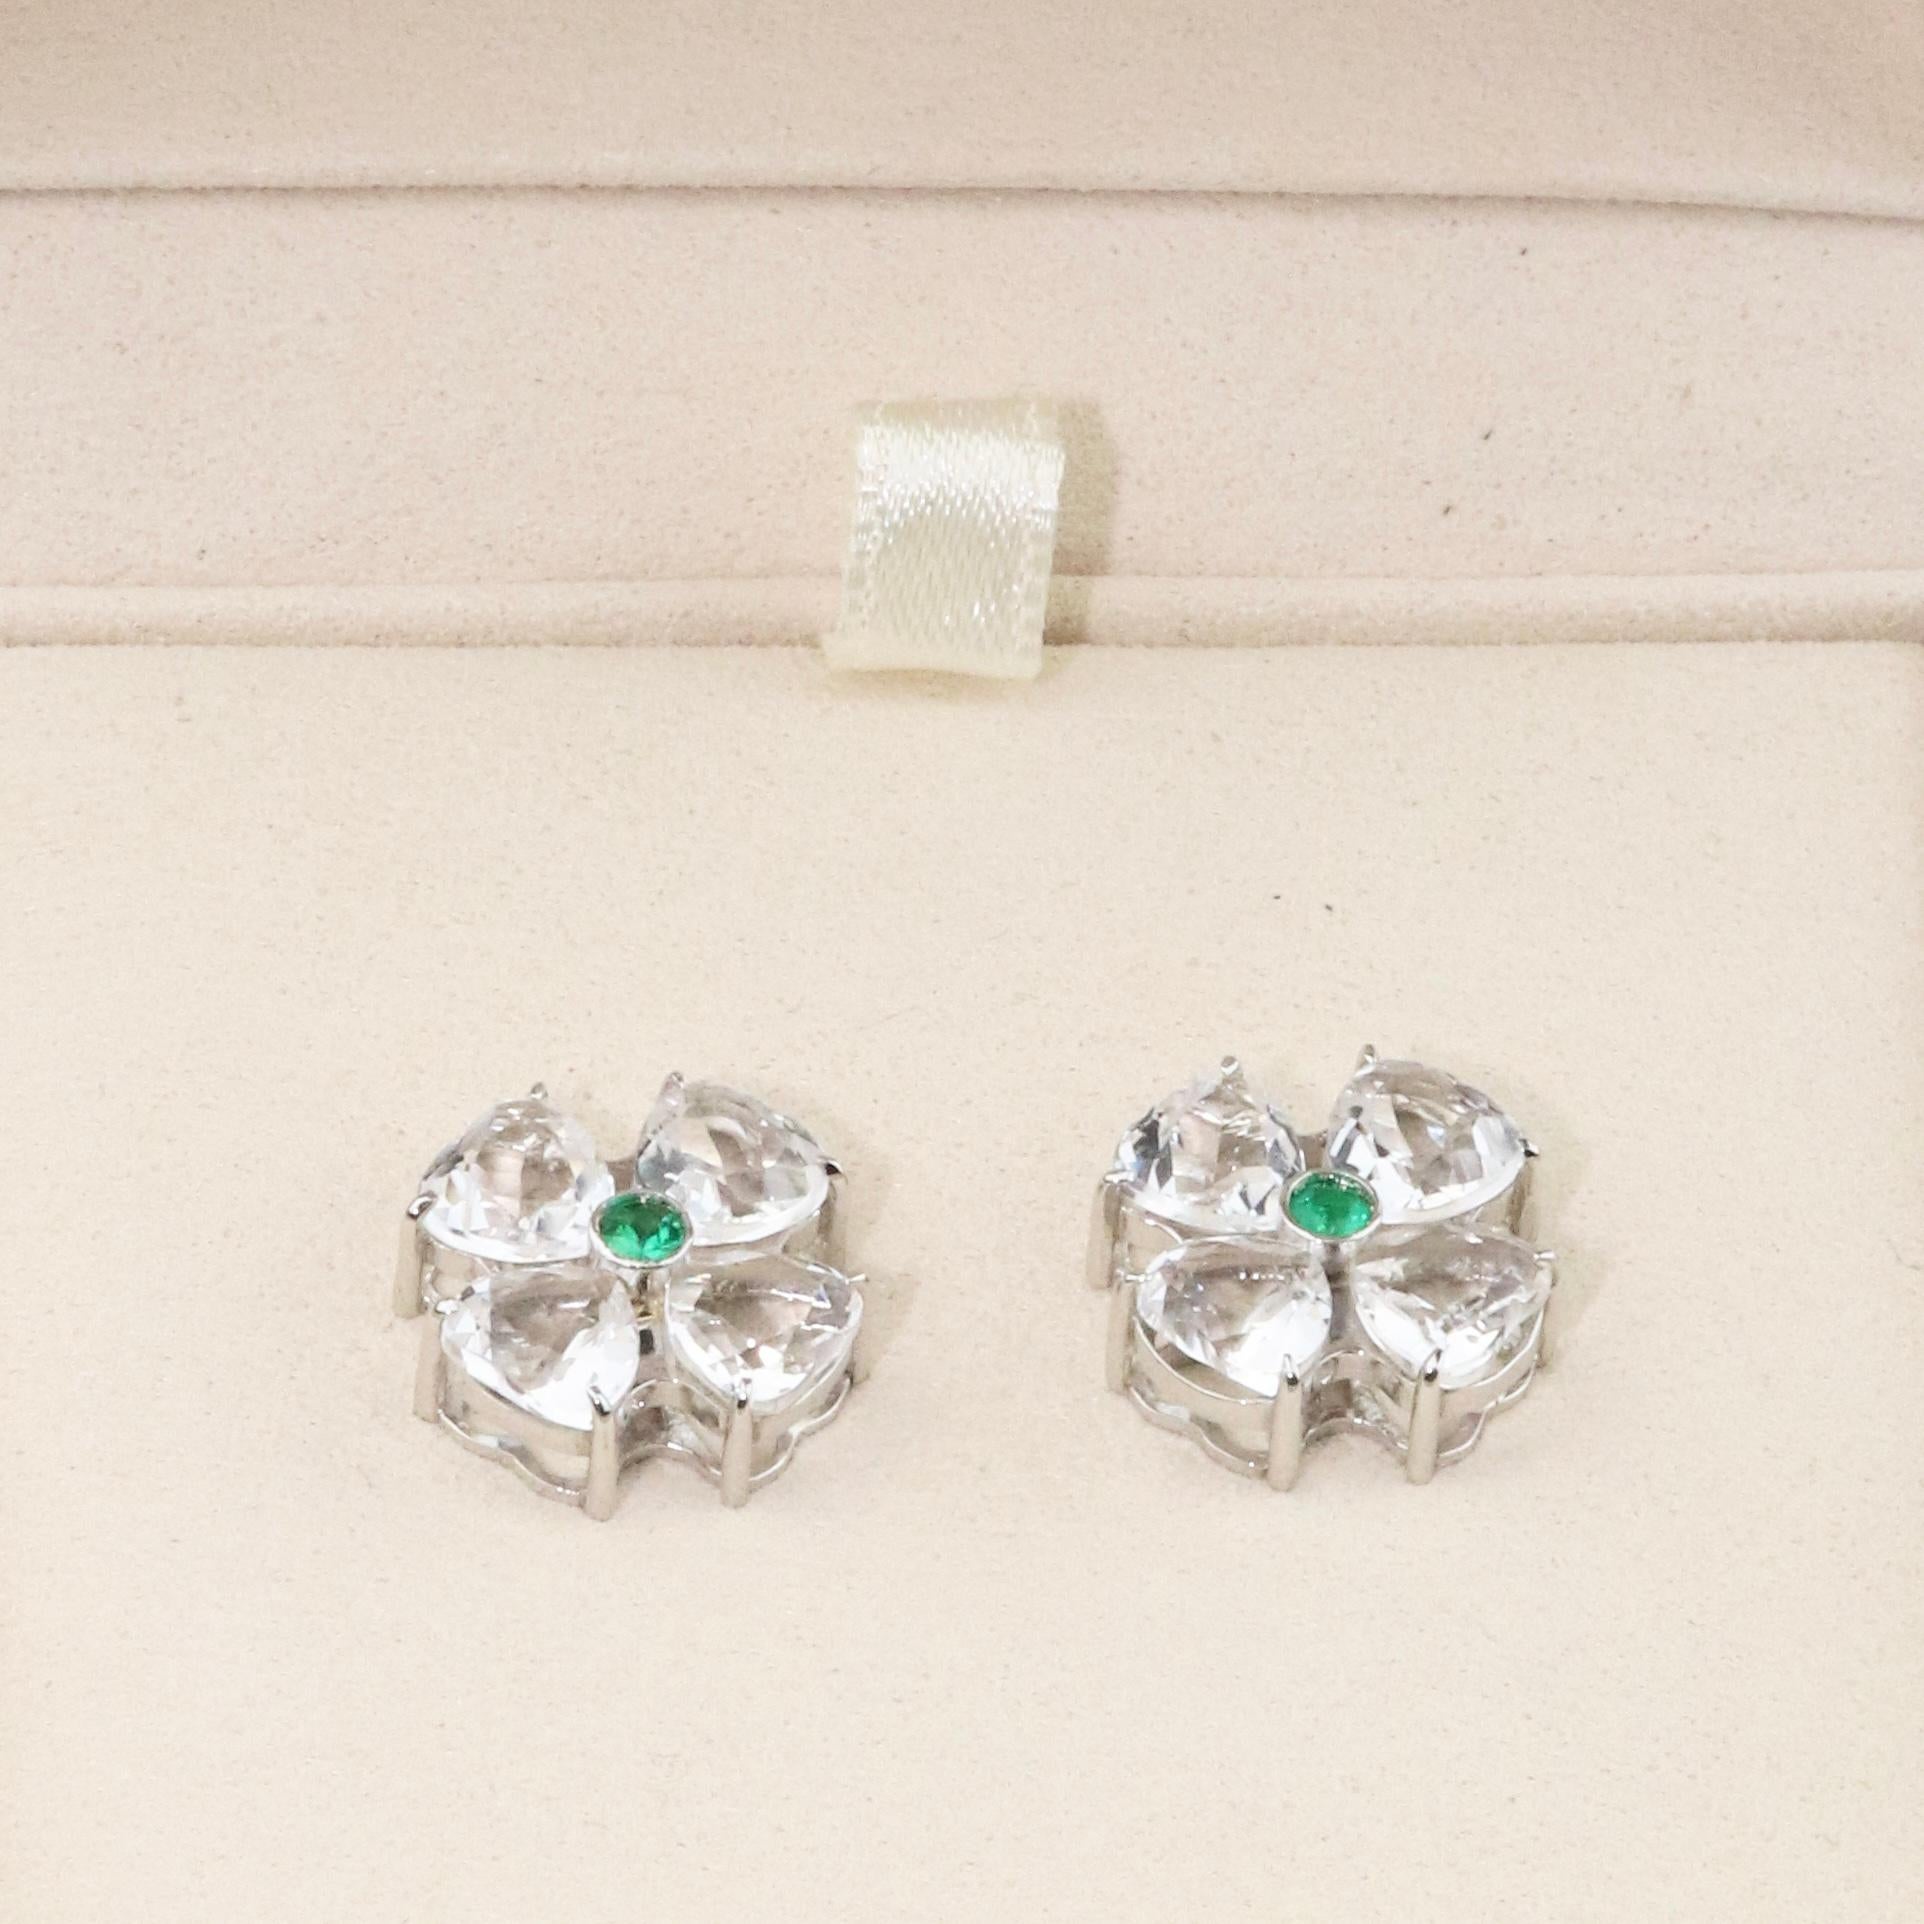 Flower Earrings & Emerald - 18K Solid White Gold In New Condition For Sale In Markham, CA